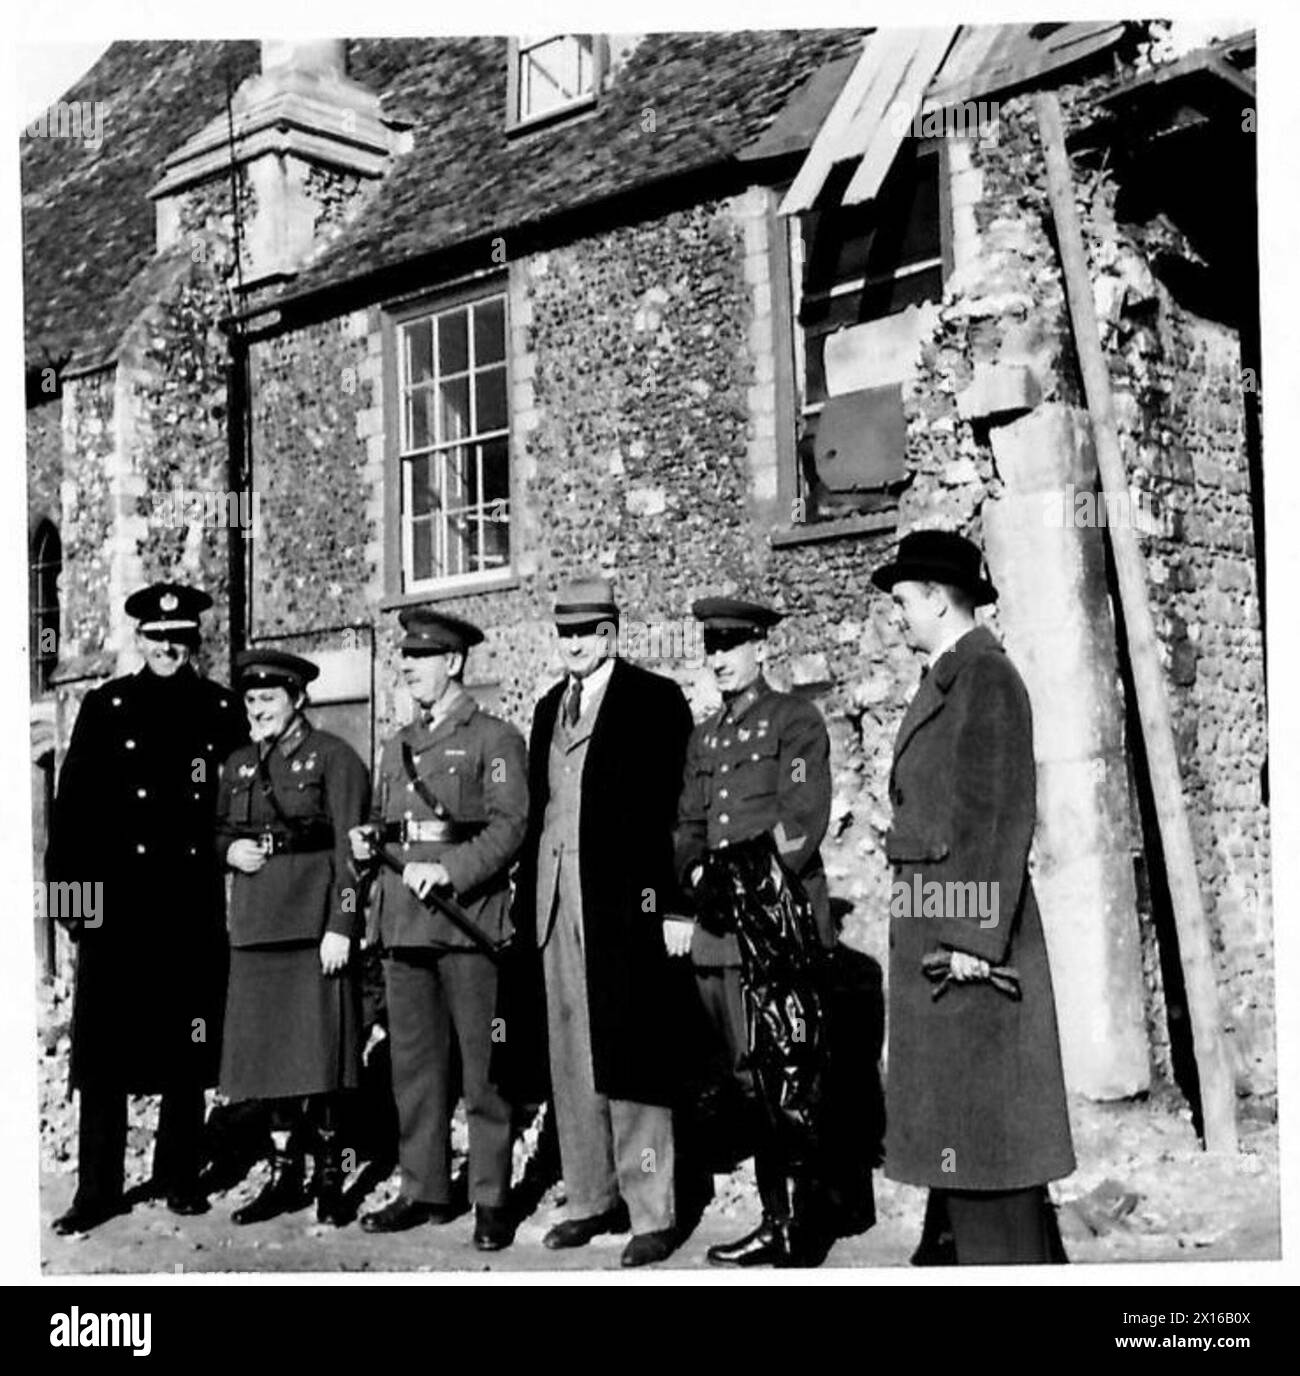 VISIT OF RUSSIAN DELEGATES TO CANTERBURY AND DOVER AREA - Group - left to right - The Chief Constable of Canterbury Lt. Lyudmila Pavlichenko Captain Harker P.R.O. Mr. Nikolai Krasanchenko Lt. Vladimir Pchelintsev and a Ministry of Information representative British Army Stock Photo